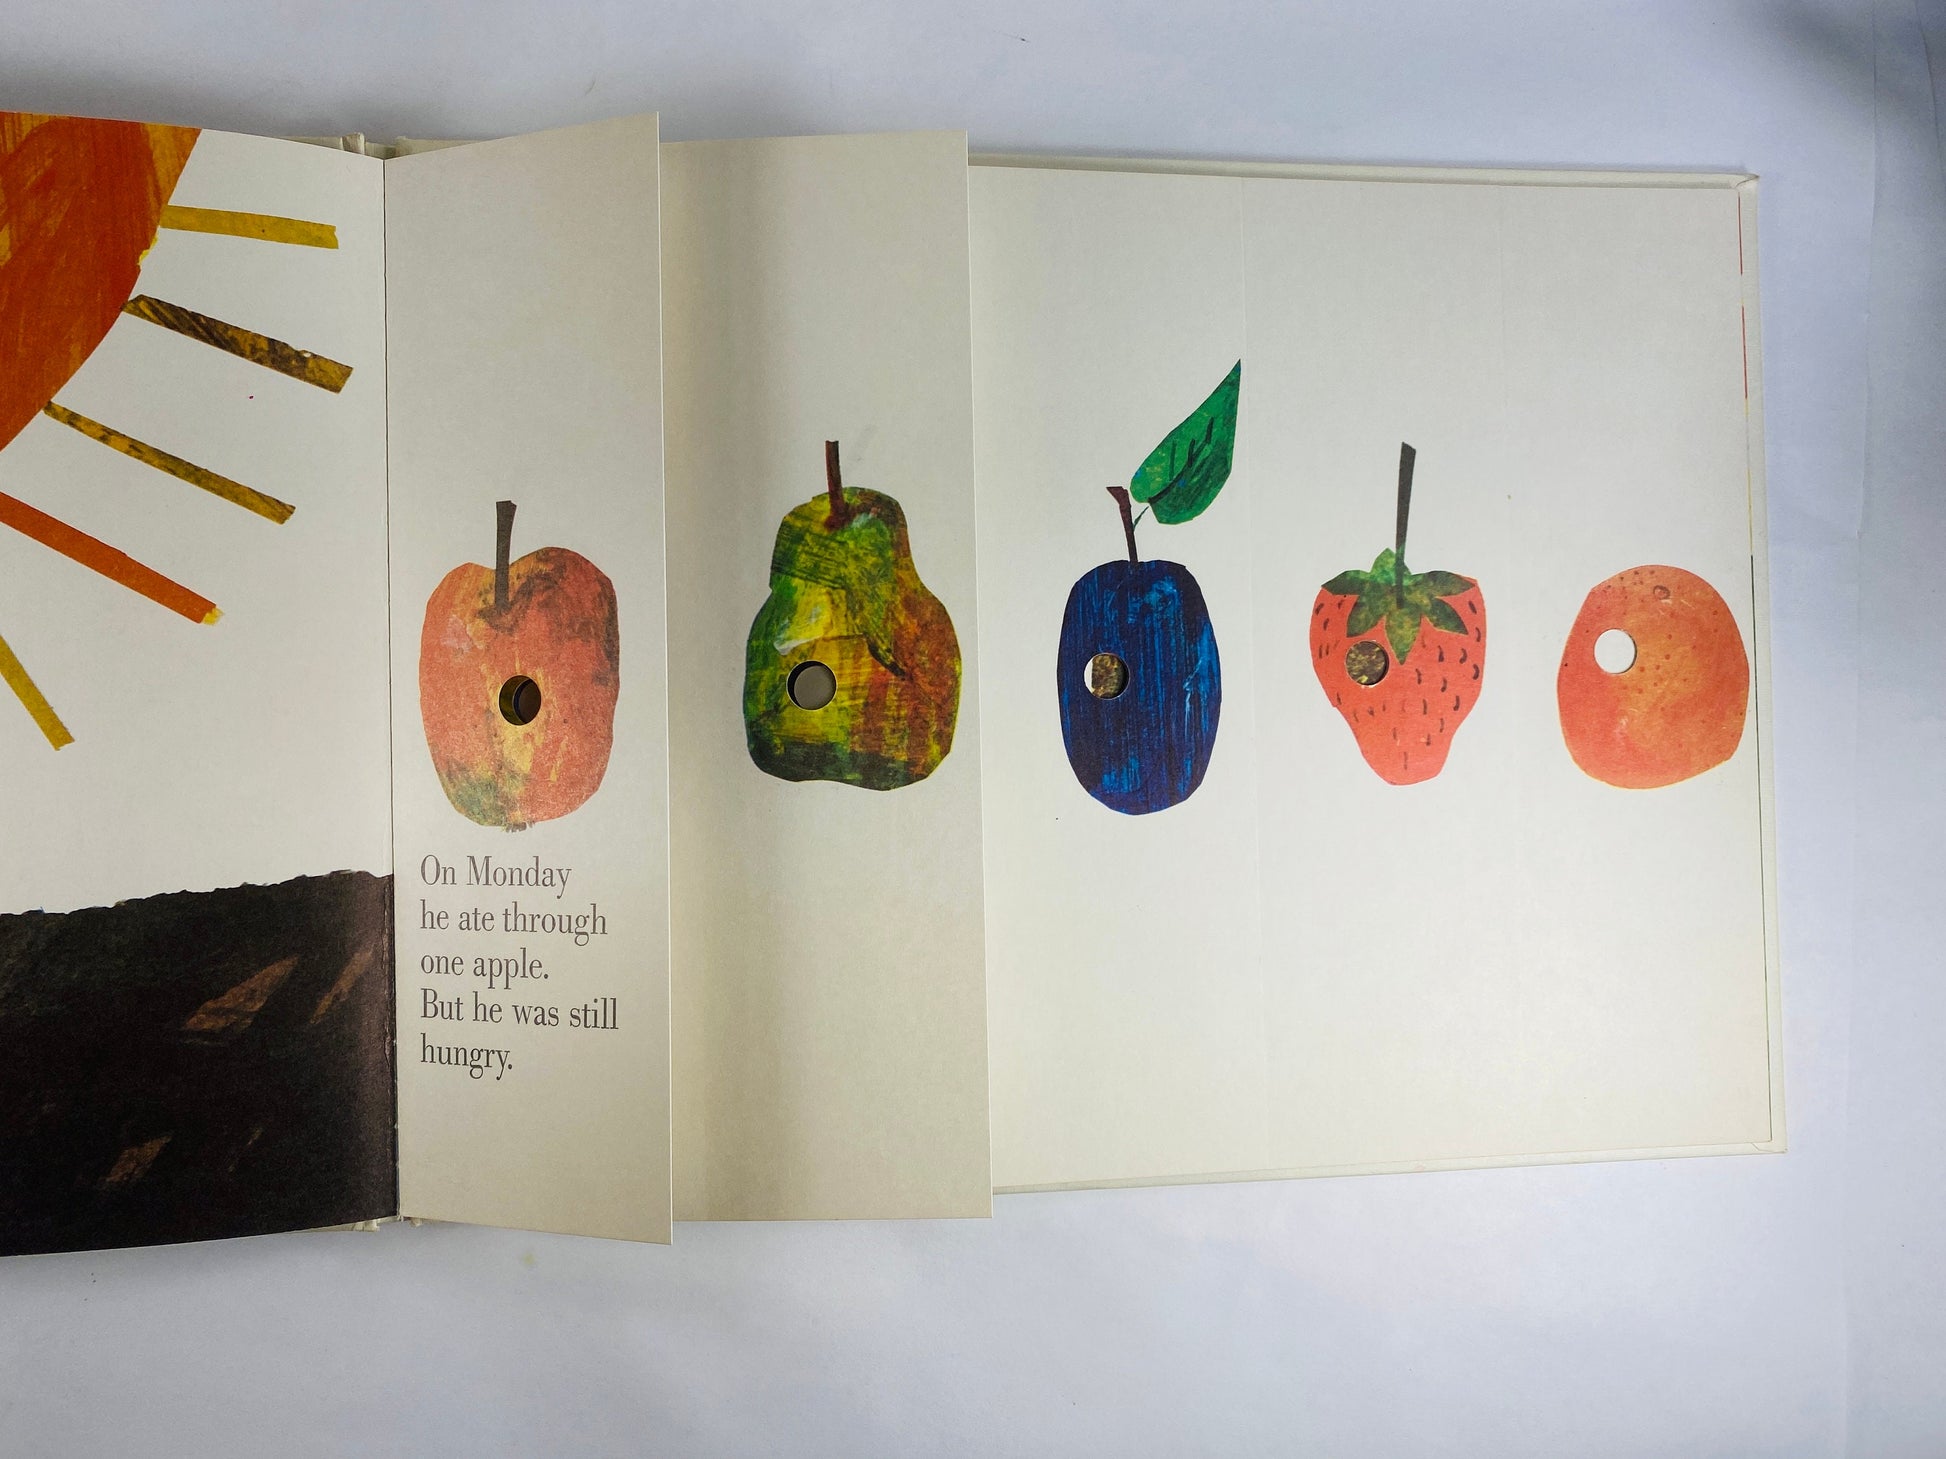 1976 Hungry Caterpillar vintage book by Eric Carle EARLY PRINTING Children’s book about filling tummy with literature.